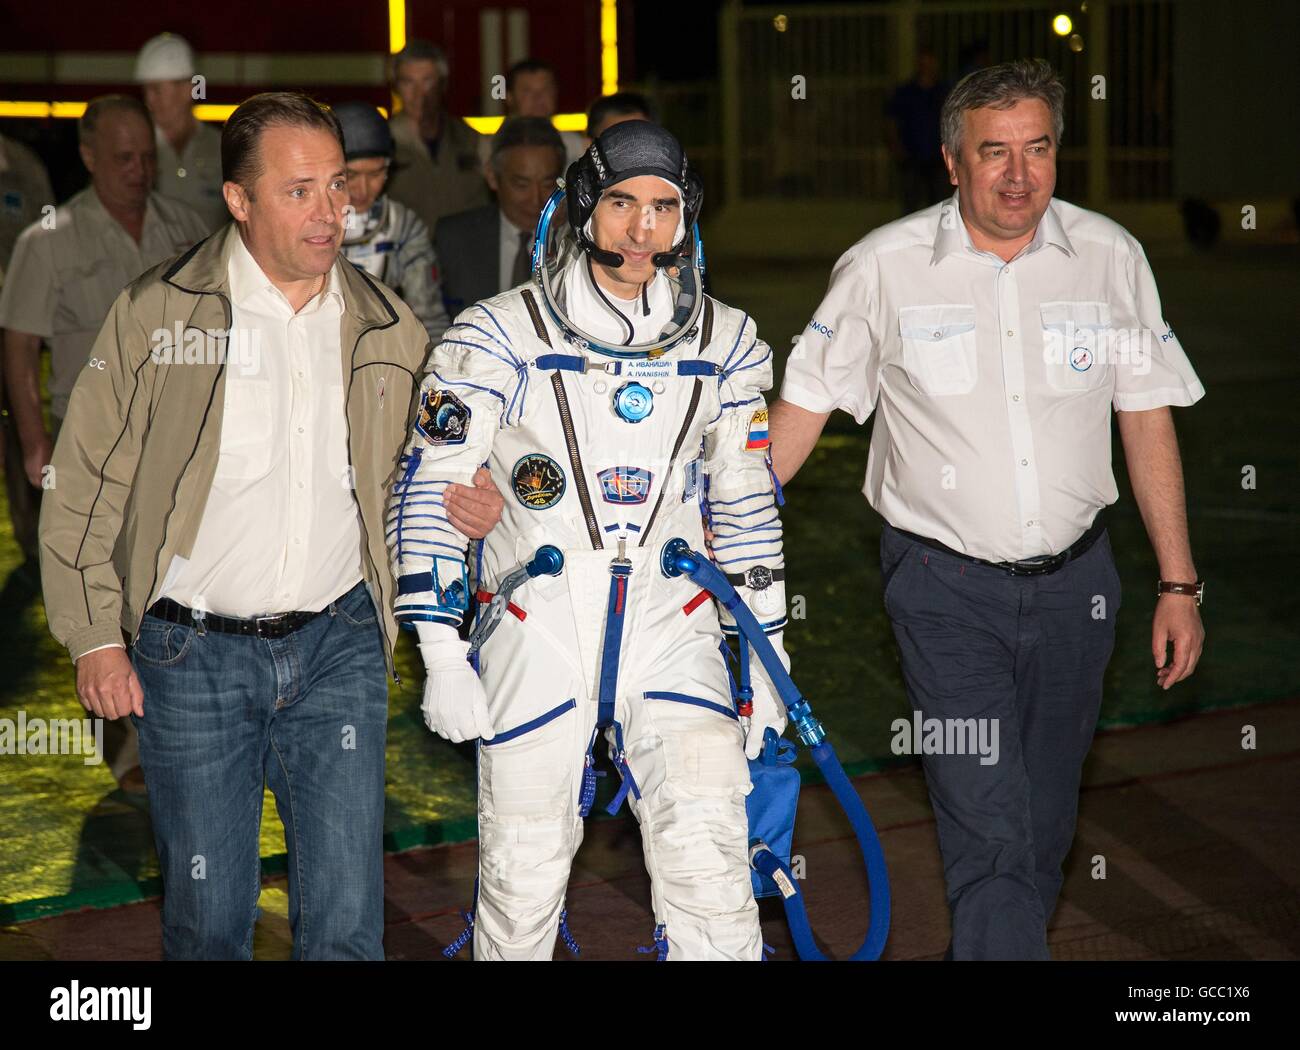 Director General of Roscosmos Igor Komarov, left, and First Deputy Director General Alexander Ivanov walk with Russian cosmonaut Anatoly Ivanishin to the launch pad in preparation for launch July 7, 2016 at the Baikonur Cosmodrome in Kazakhstan. Ivanishin joins crew members American astronaut Kate Rubins and Japanese astronaut Takuya Onishi on four-month mission. Stock Photo